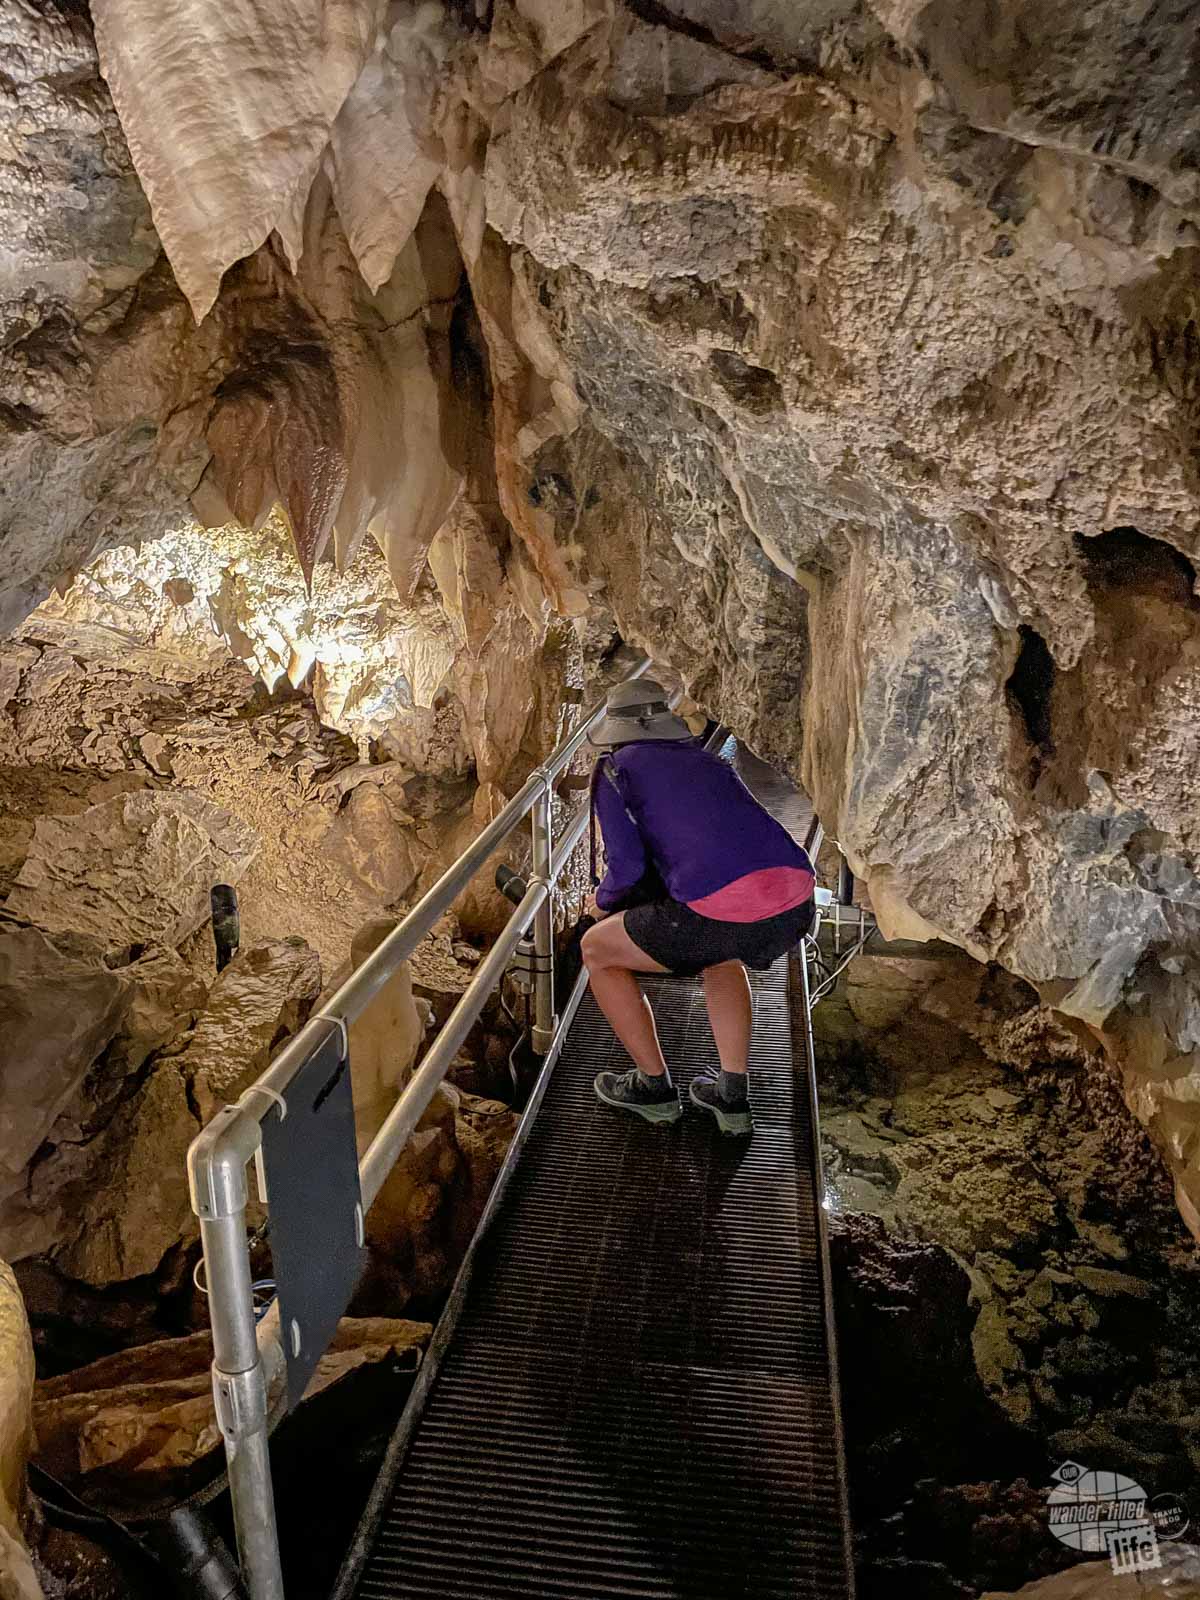 You need to be a little flexible on the cave tour to avoid hitting some of the formations.